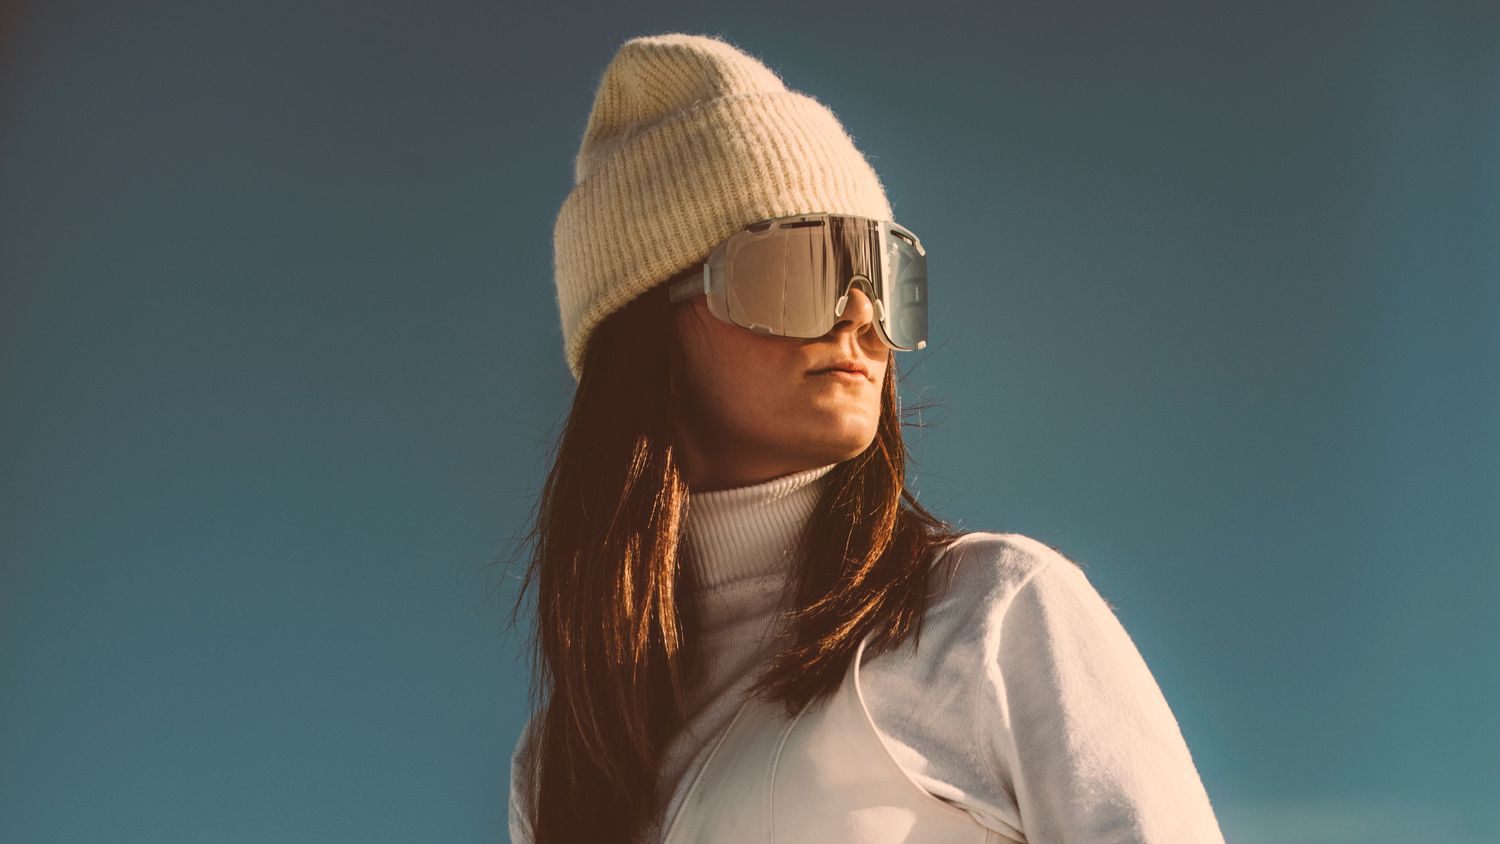 Luxury Ski Goggles: Combining Fashion and Function on the Slopes –